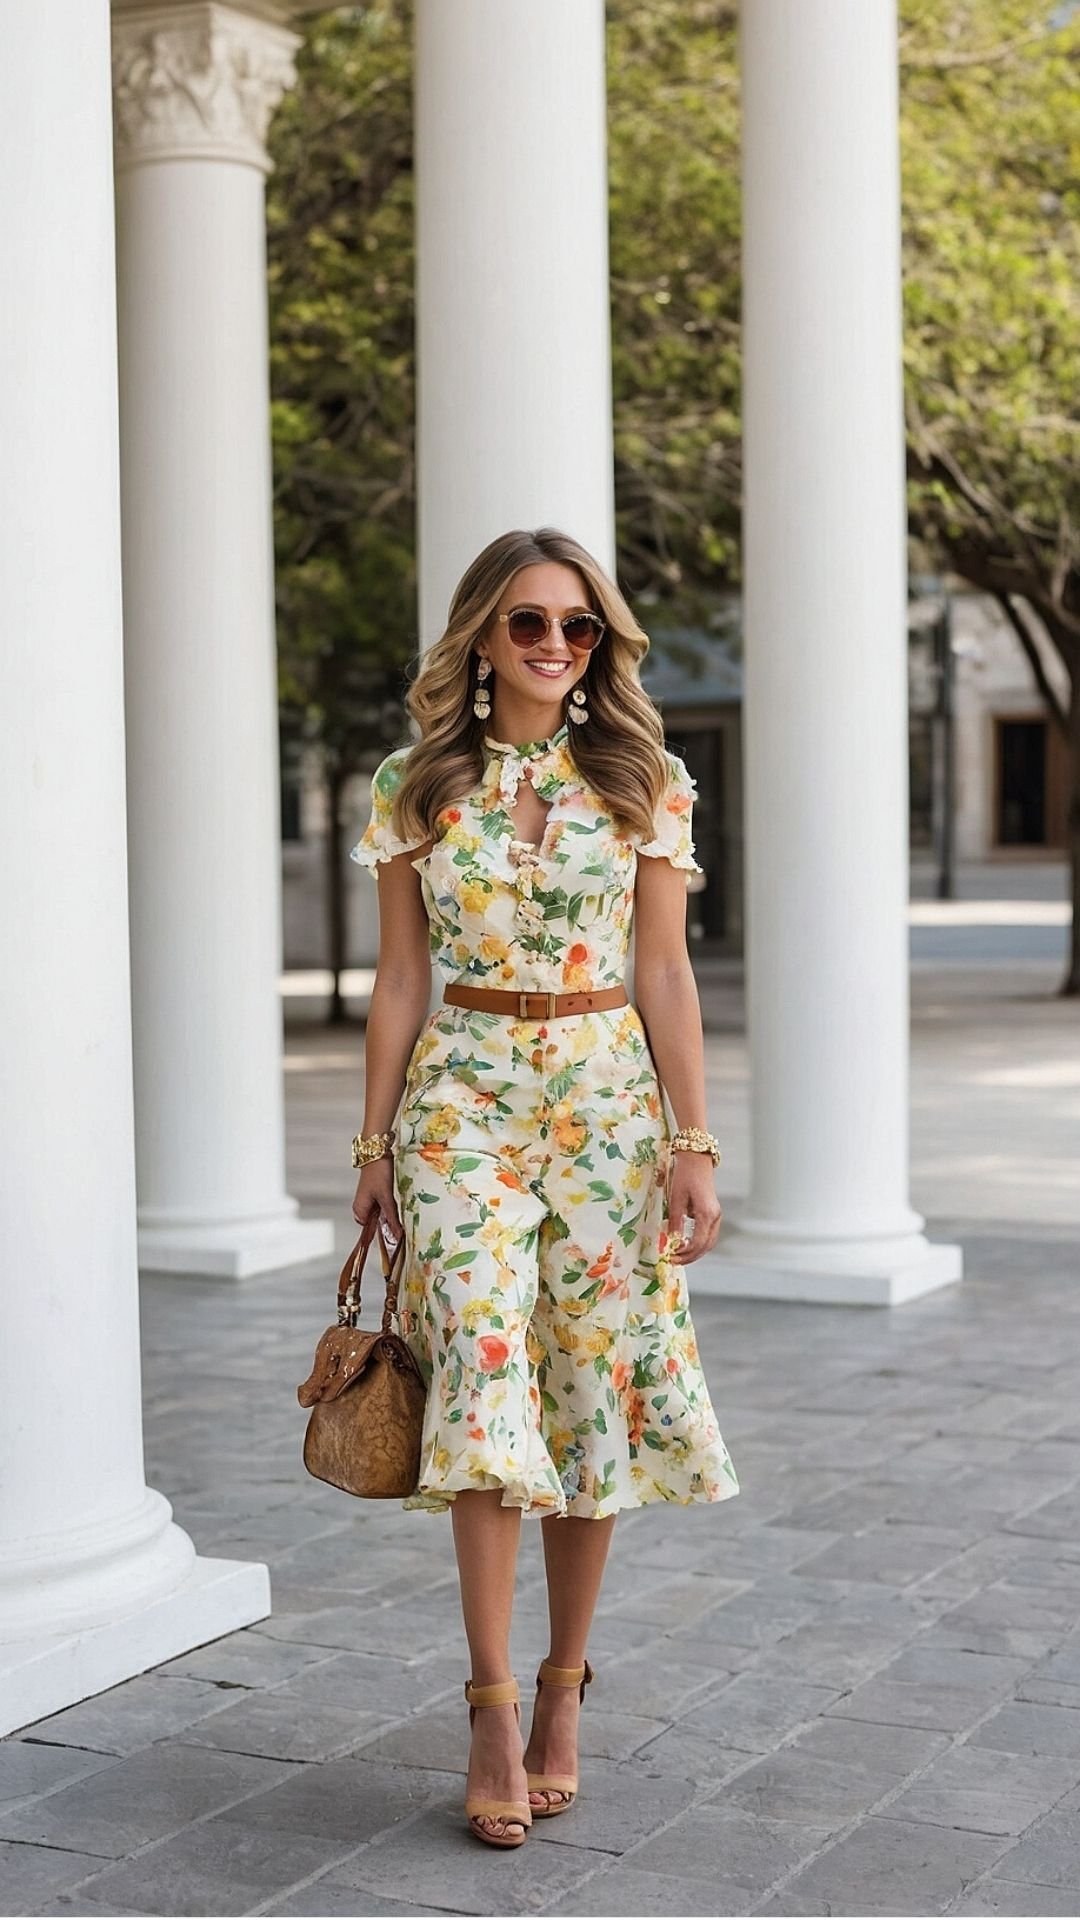 Elegant Florals and Columns: Sophisticated Day Dress